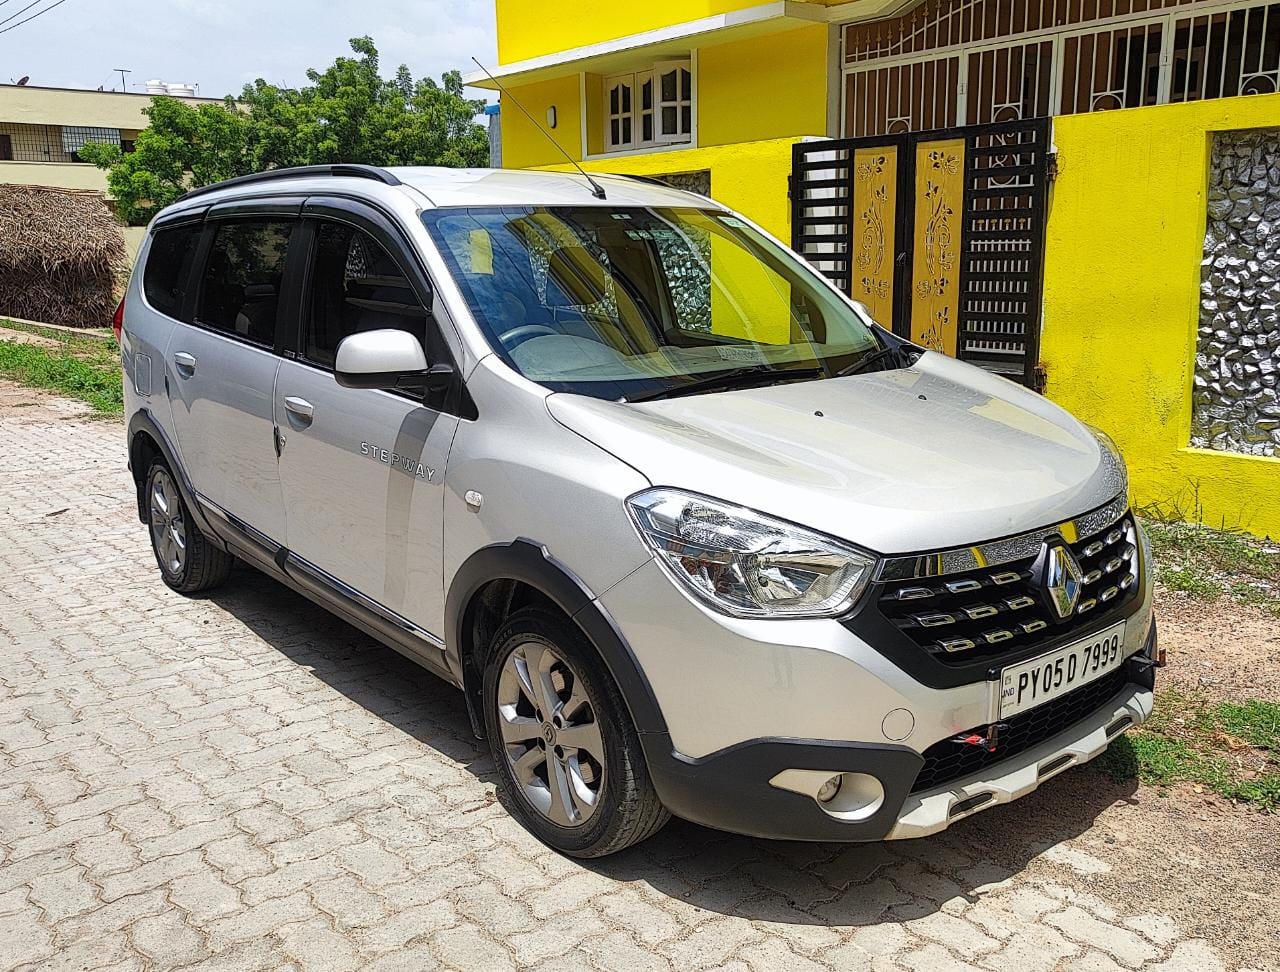 3683-for-sale-Renault-Lodgy-Diesel-First-Owner-2017-PY-registered-rs-645000